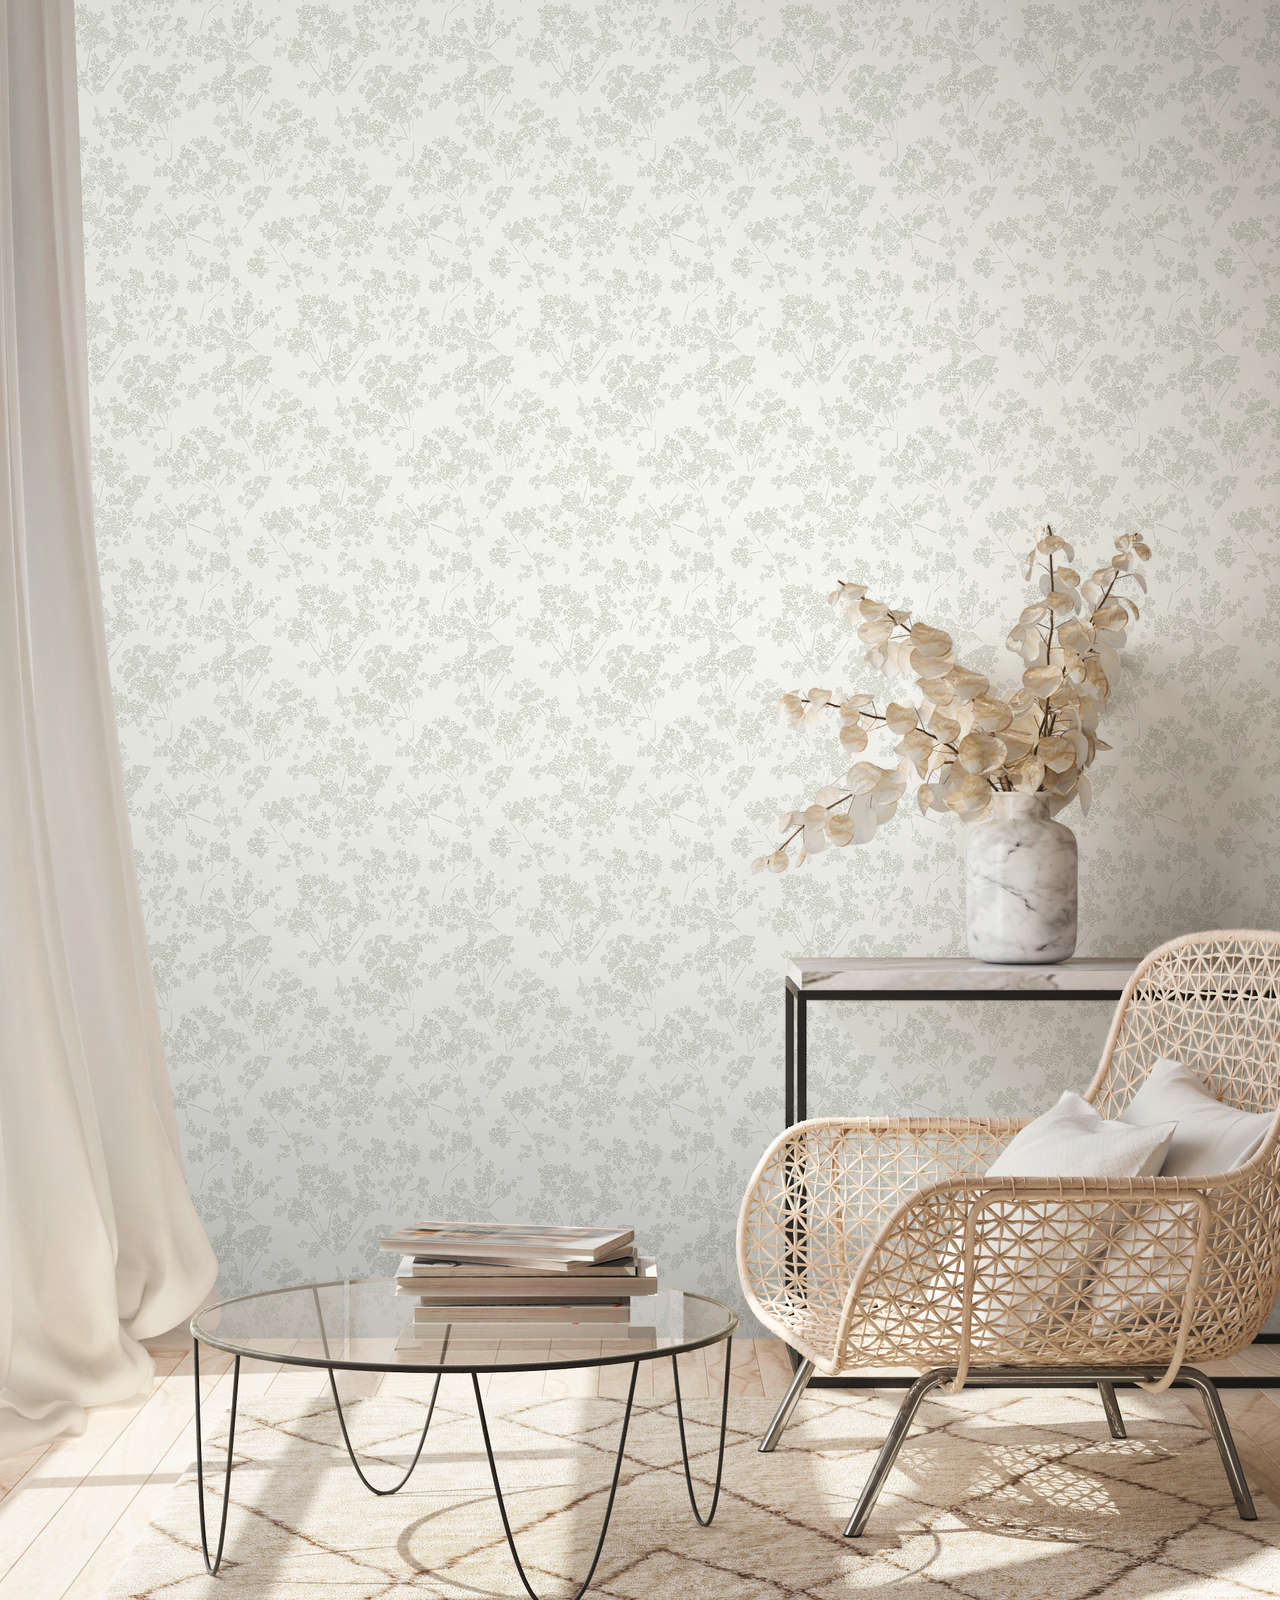             Non-woven wallpaper with floral pattern - white, green, grey
        